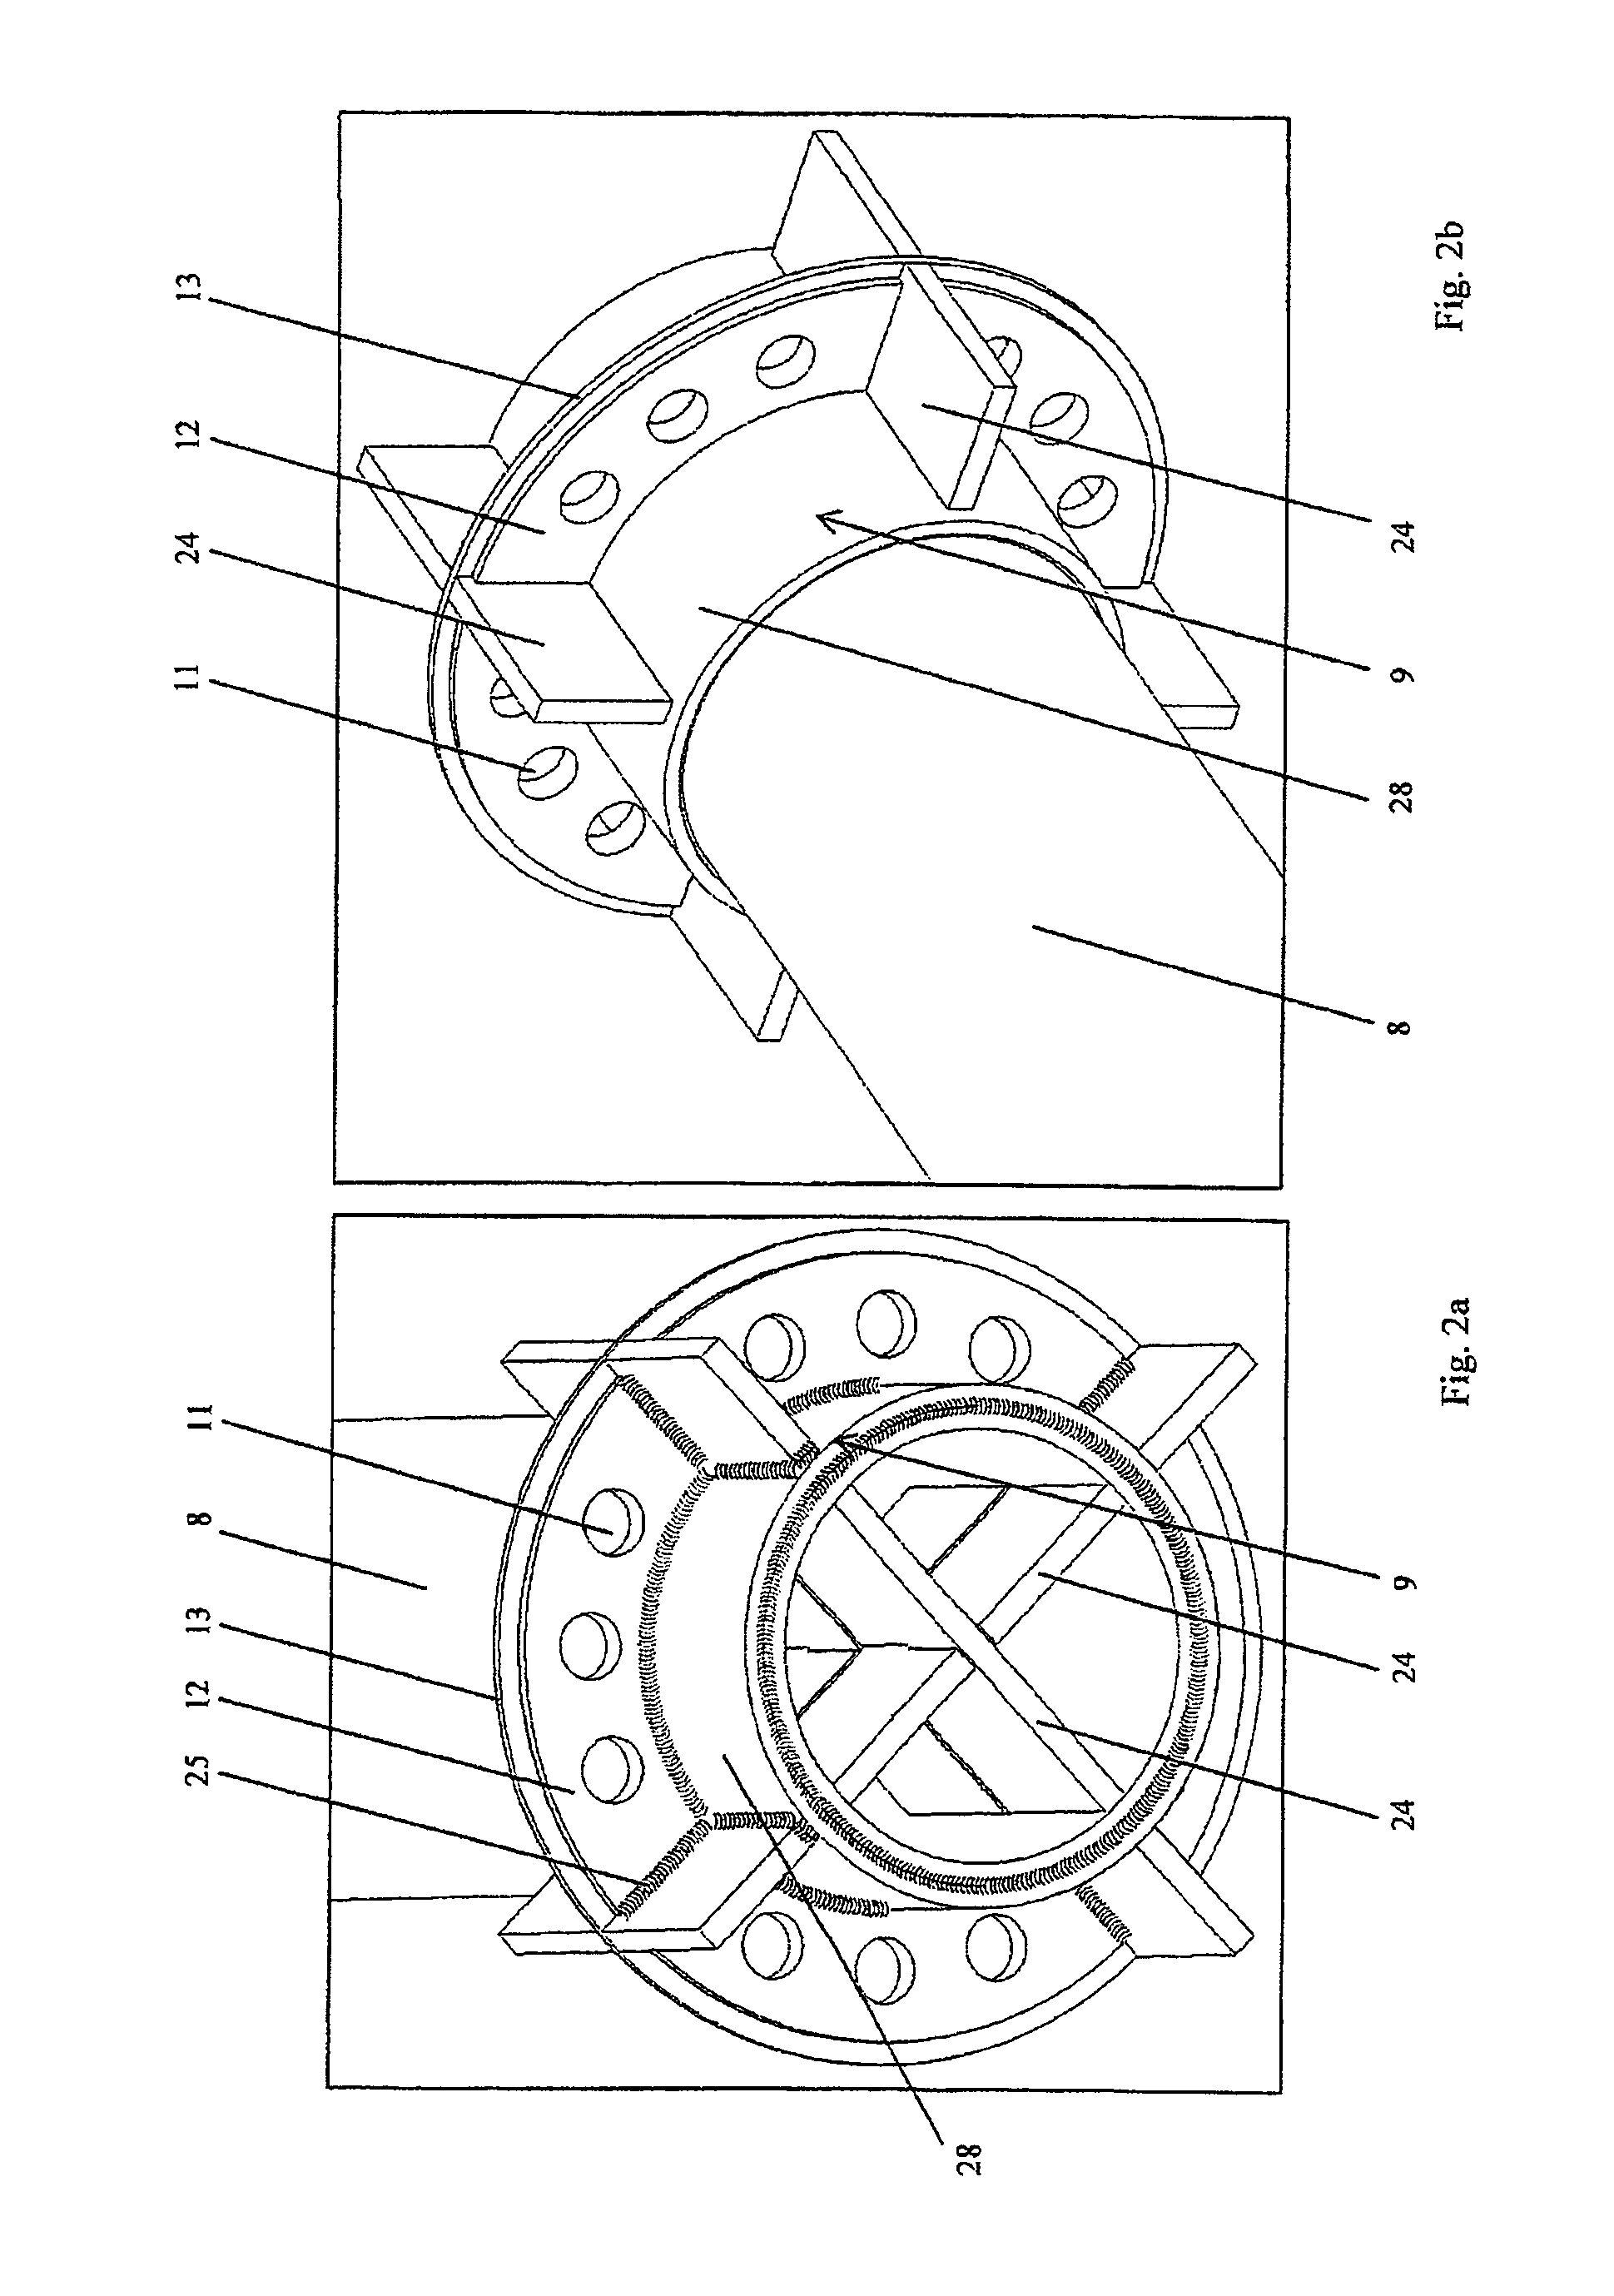 Apparatus for use in the glass industry and method for processing molten glass